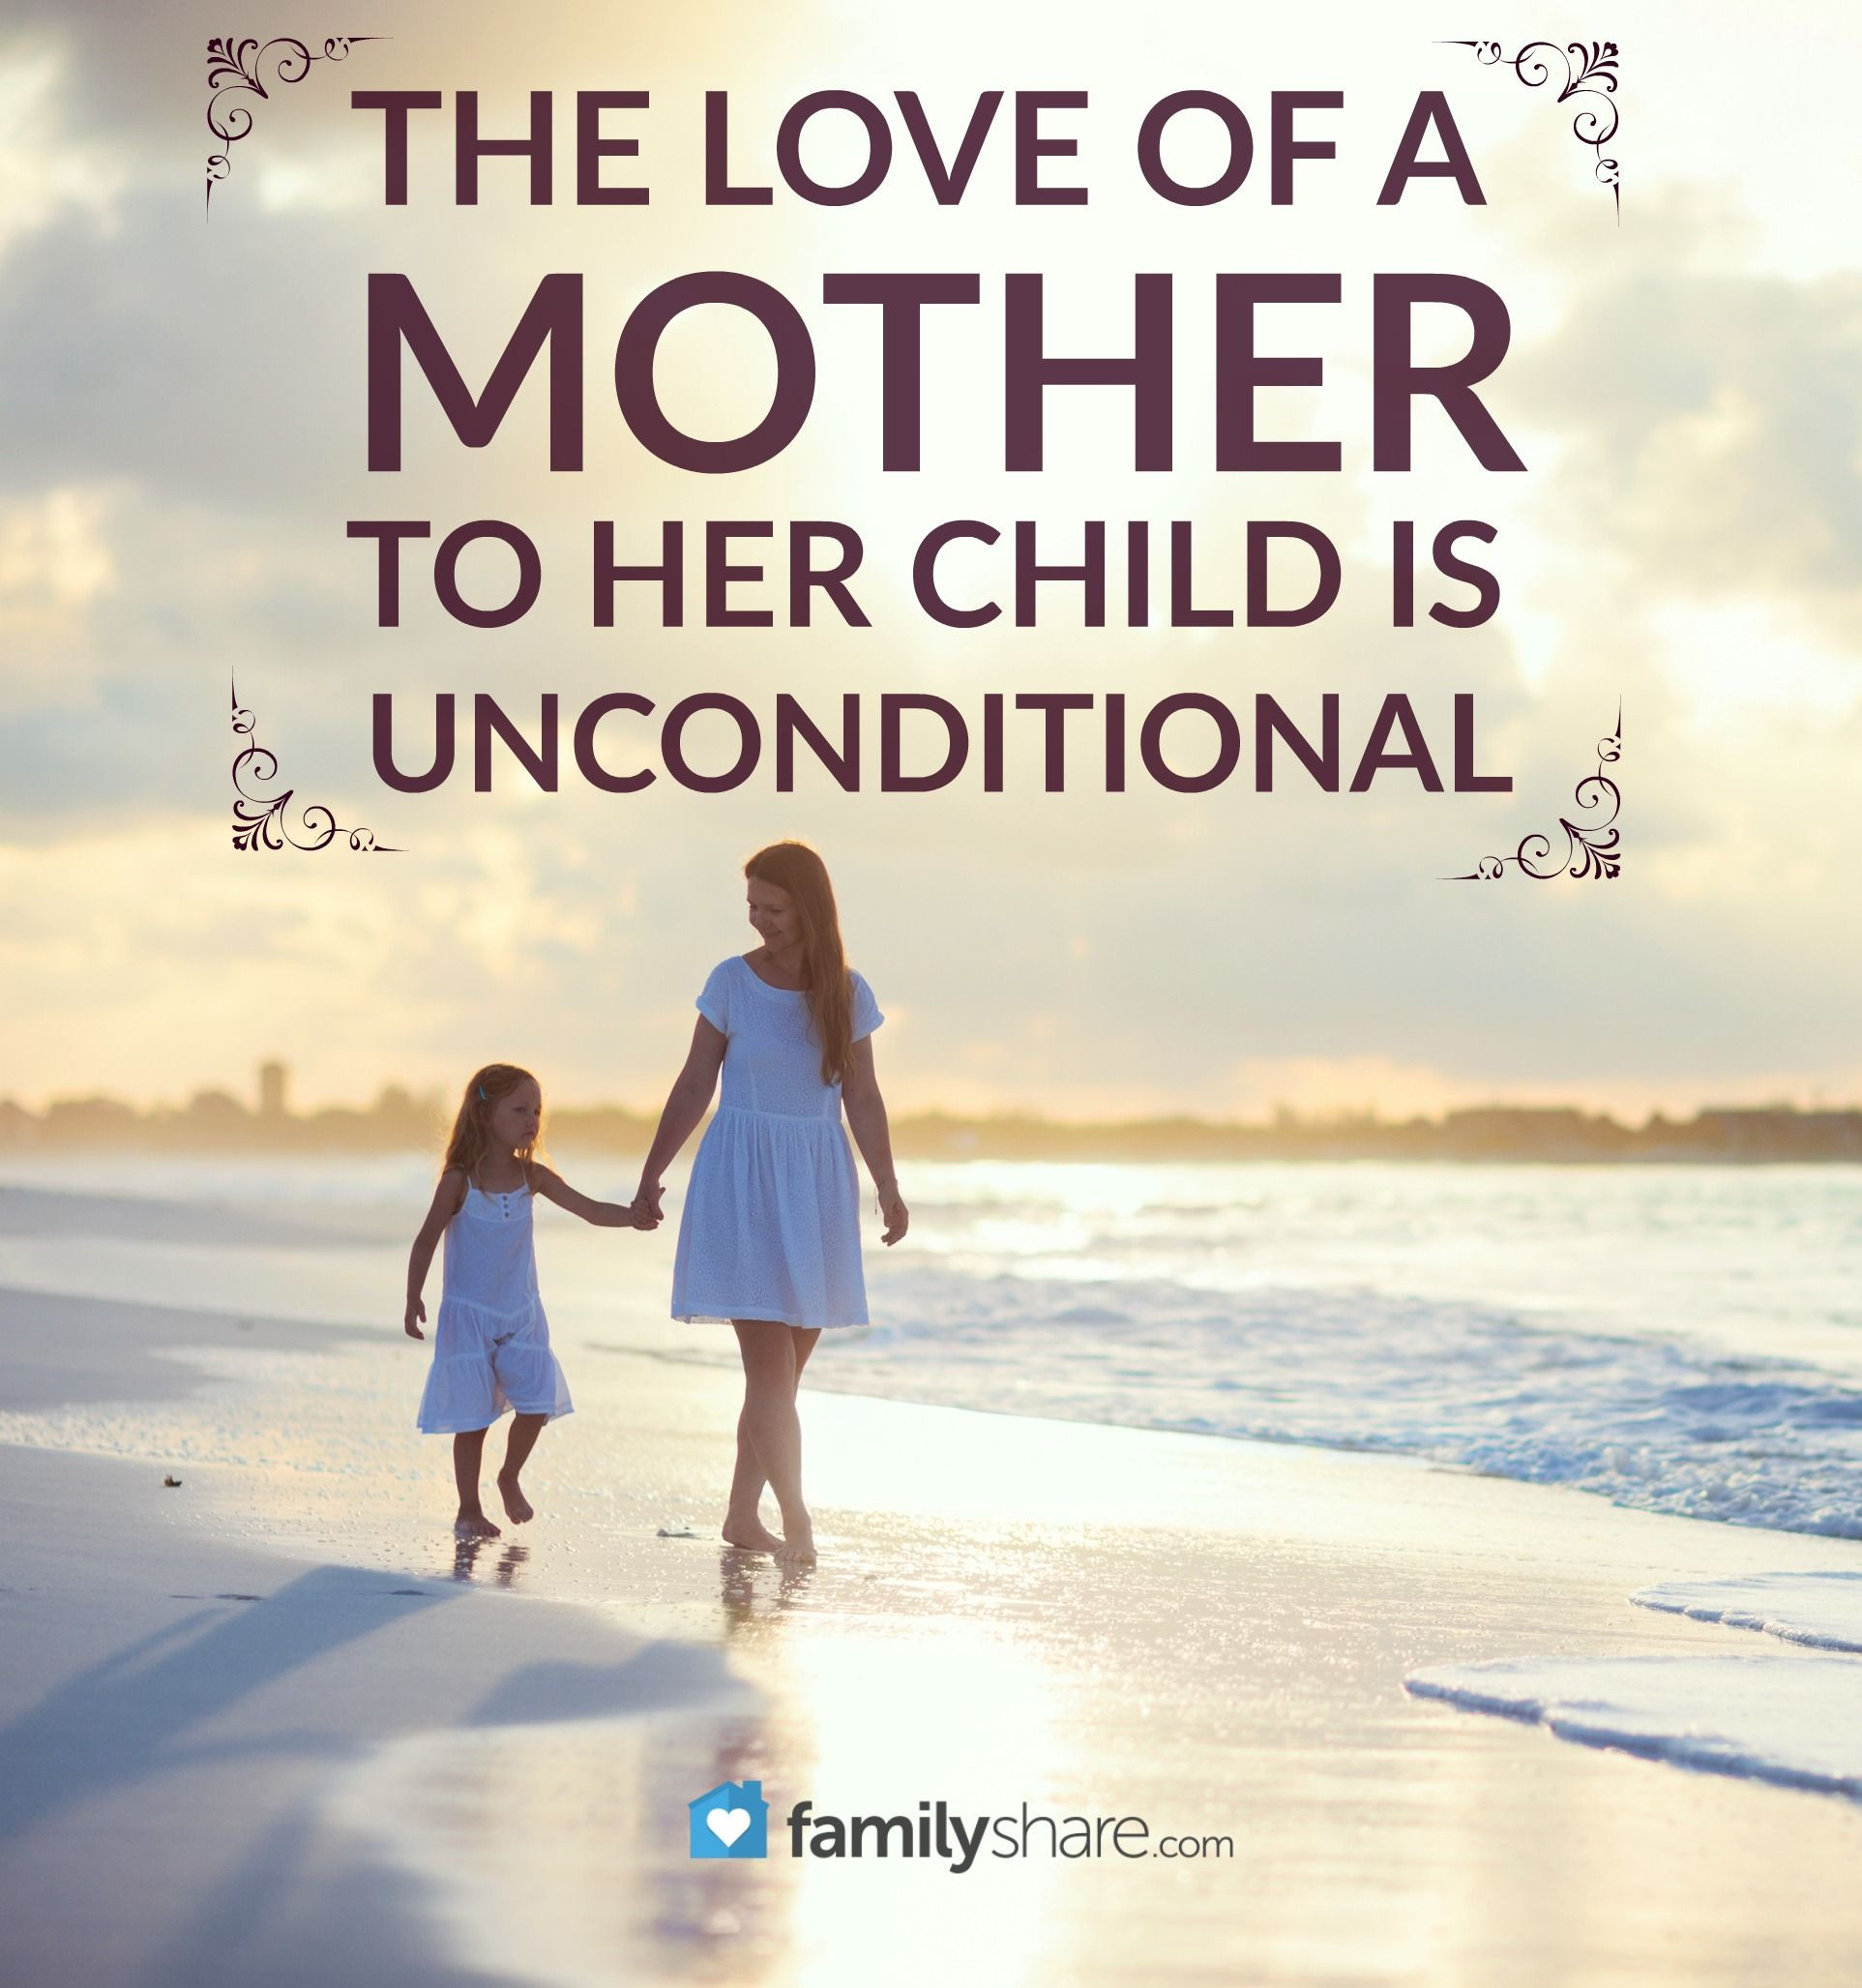 Unconditional Love Quotes For Child
 The love of a mother to her child is unconditional